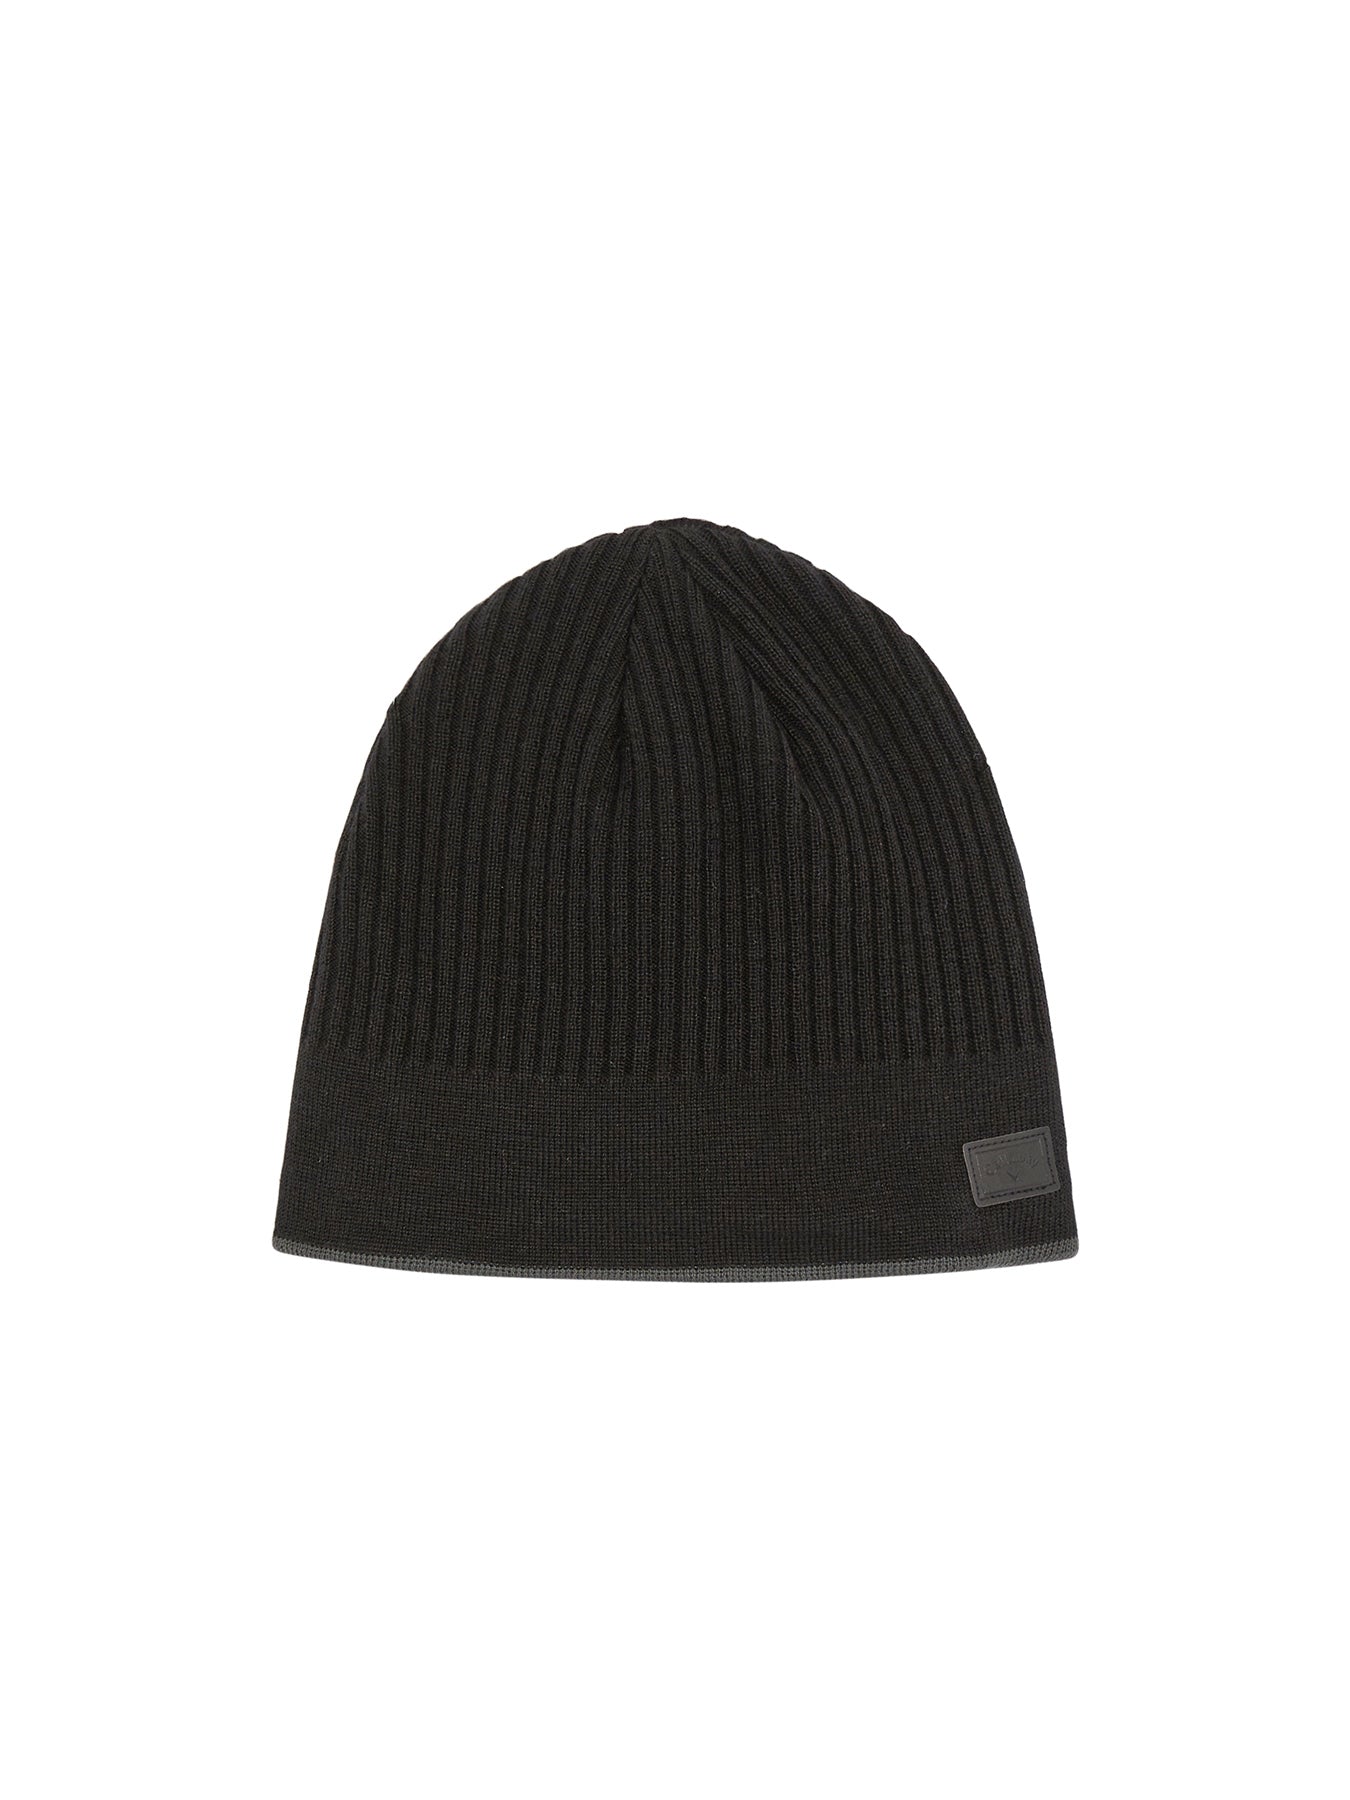 View Winter Rules Beanie In Black information